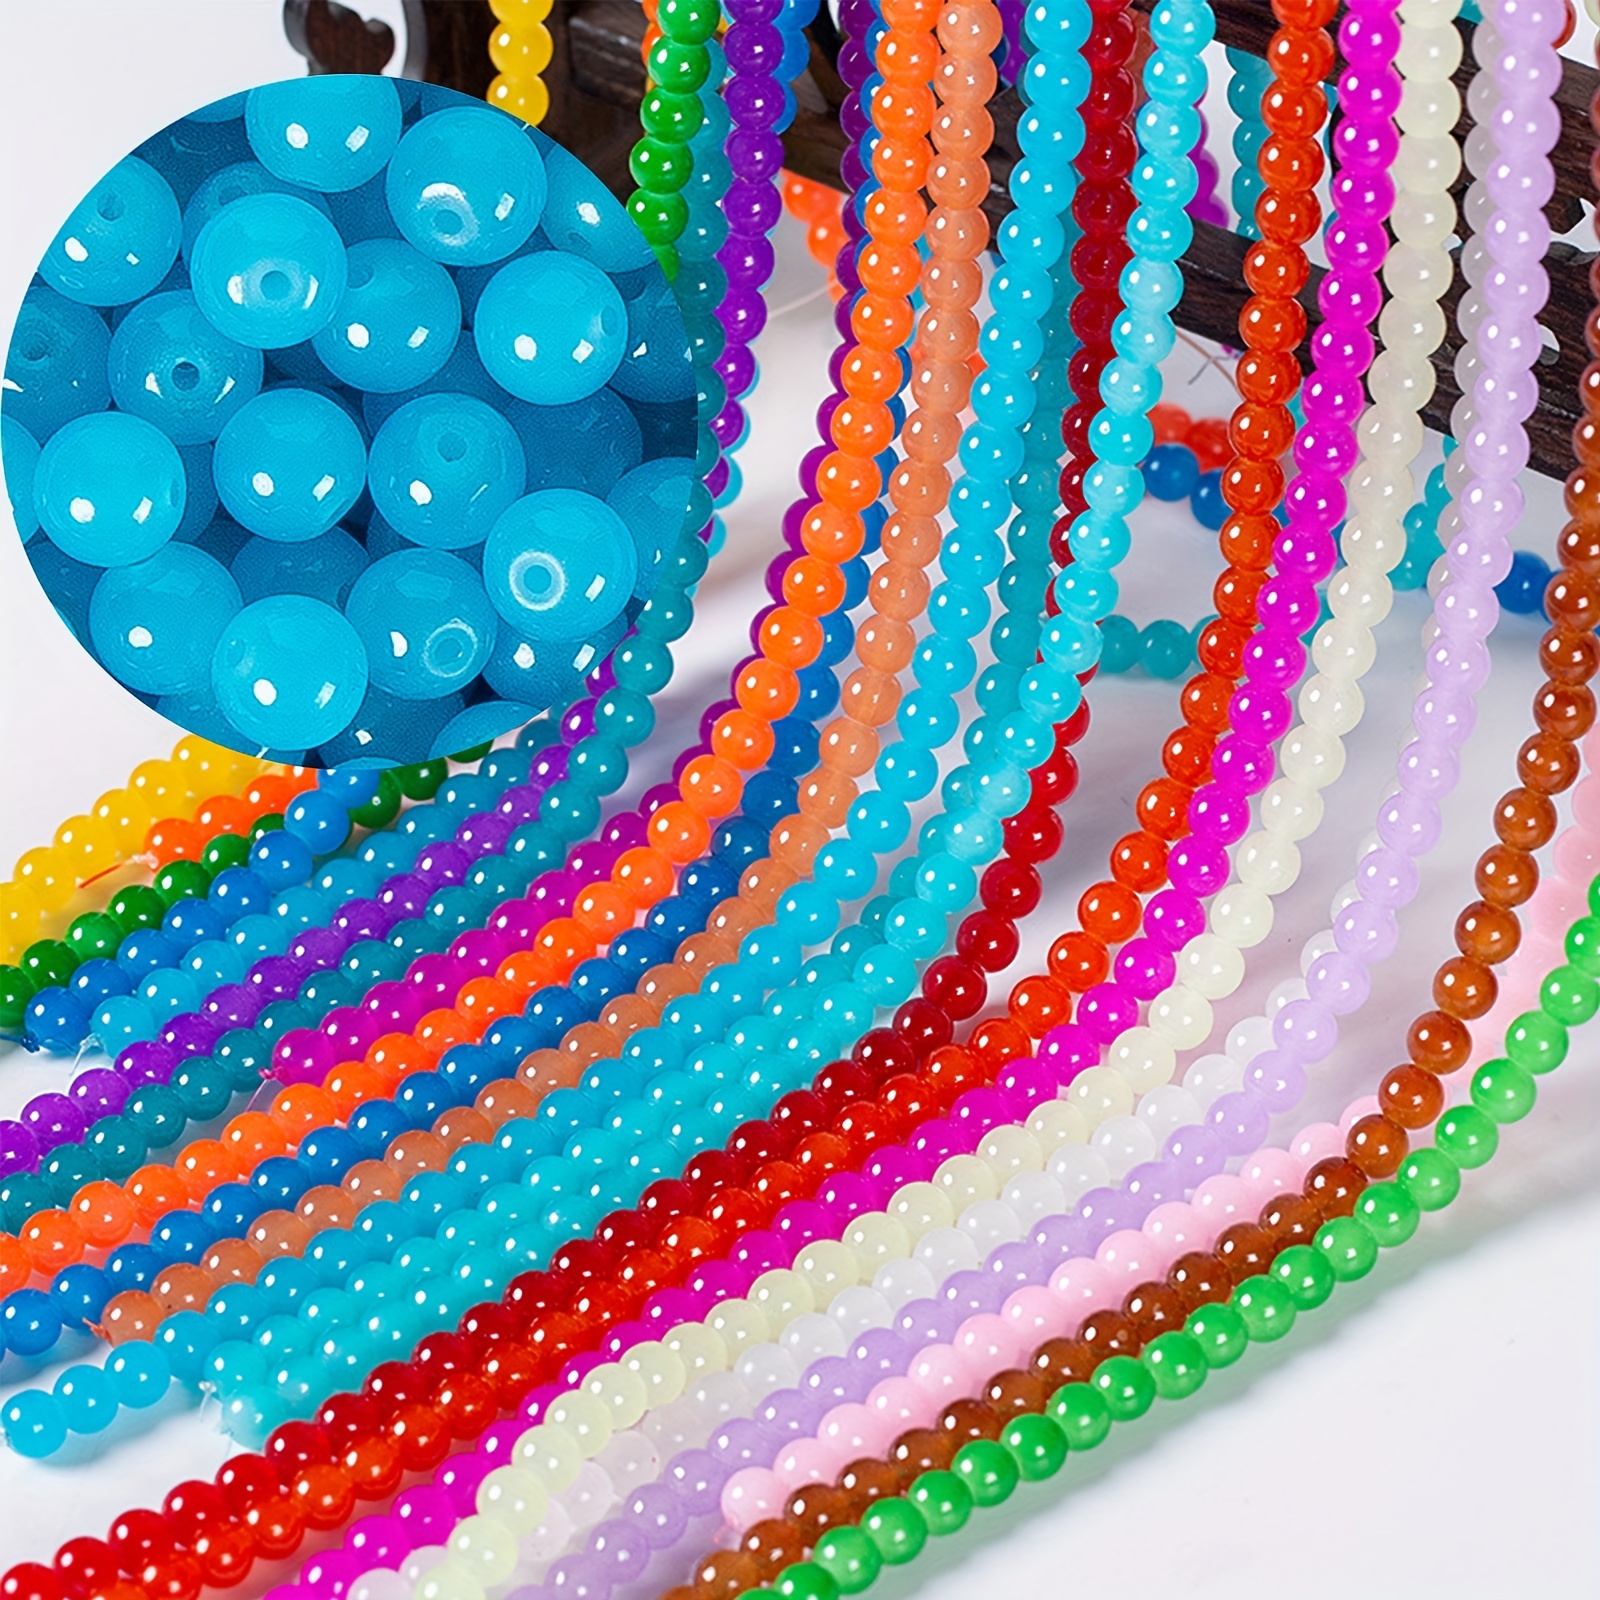 500 Pieces Acrylic Beads 8 mm Multicolor Acrylic Round Loose Beads for  Bracelets and Necklaces Jewelry Making Supplies, Random Color (Ink Pattern)